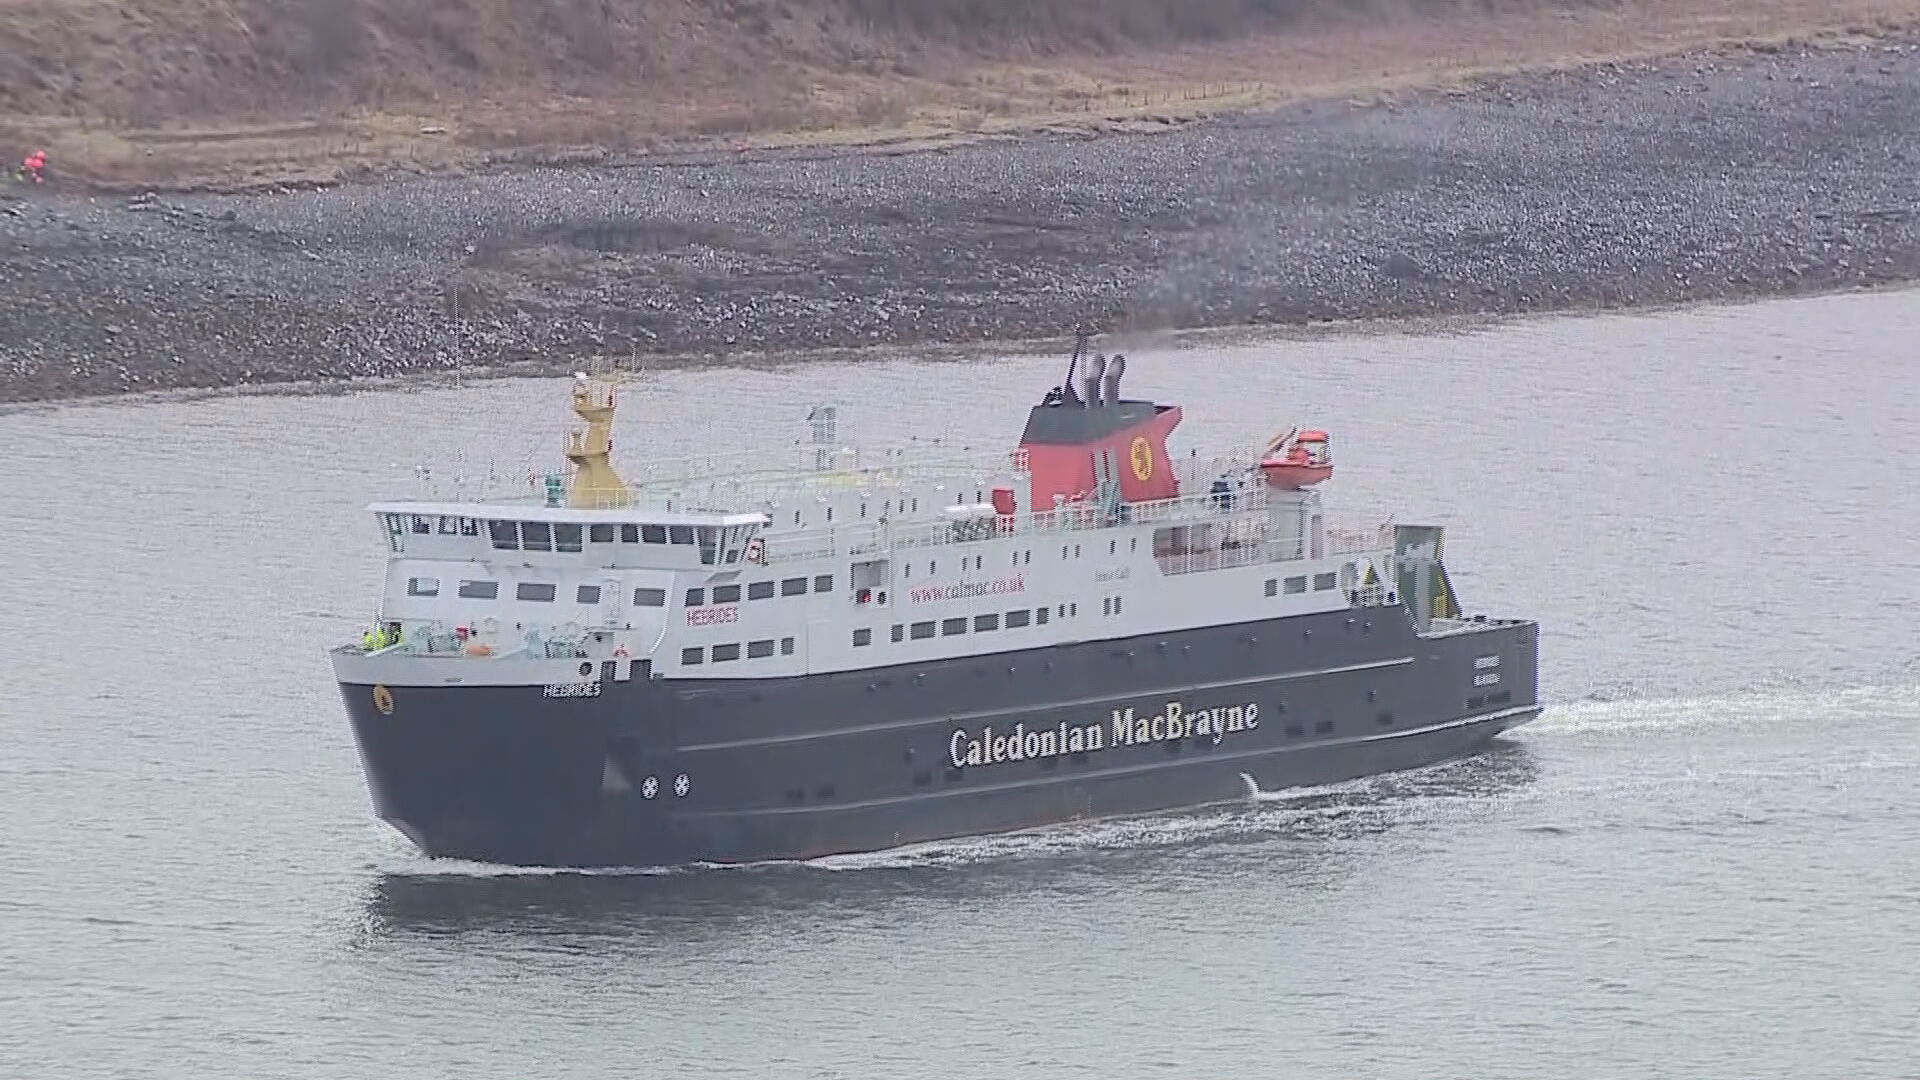 The leader of Orkney Islands Council said the area is dealing with an ageing ferry fleet which is beginning to fail.